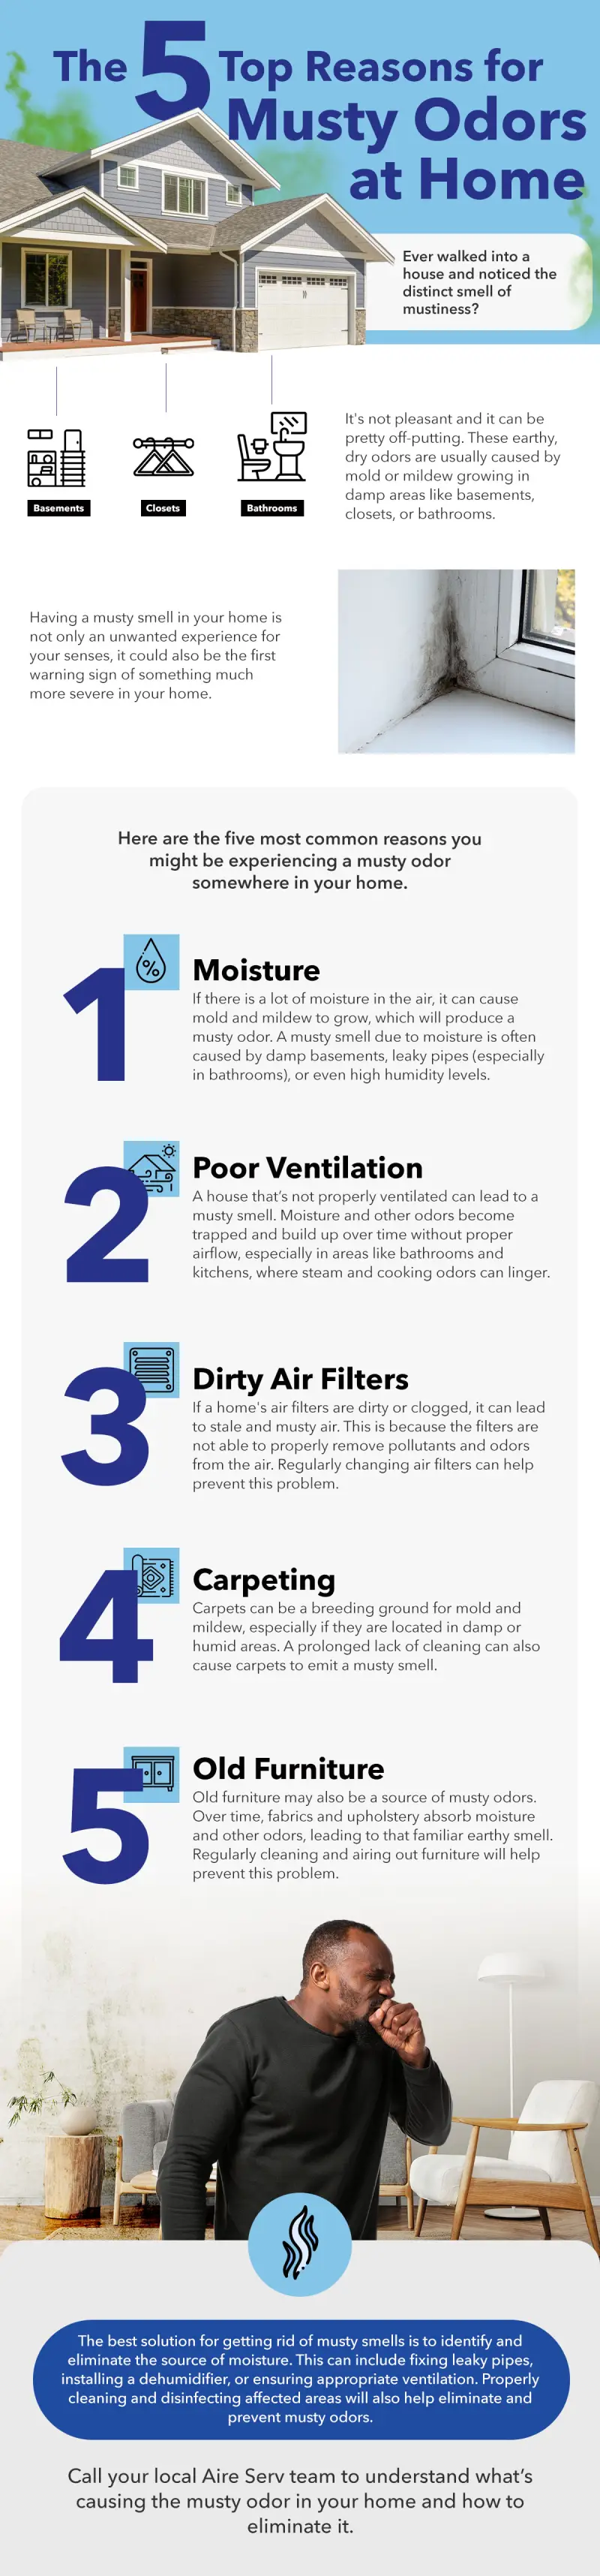 Infographic of the five reasons for musty odors in the home: moisture, poor ventilation, dirty air filters, carpeting, and old furniture.